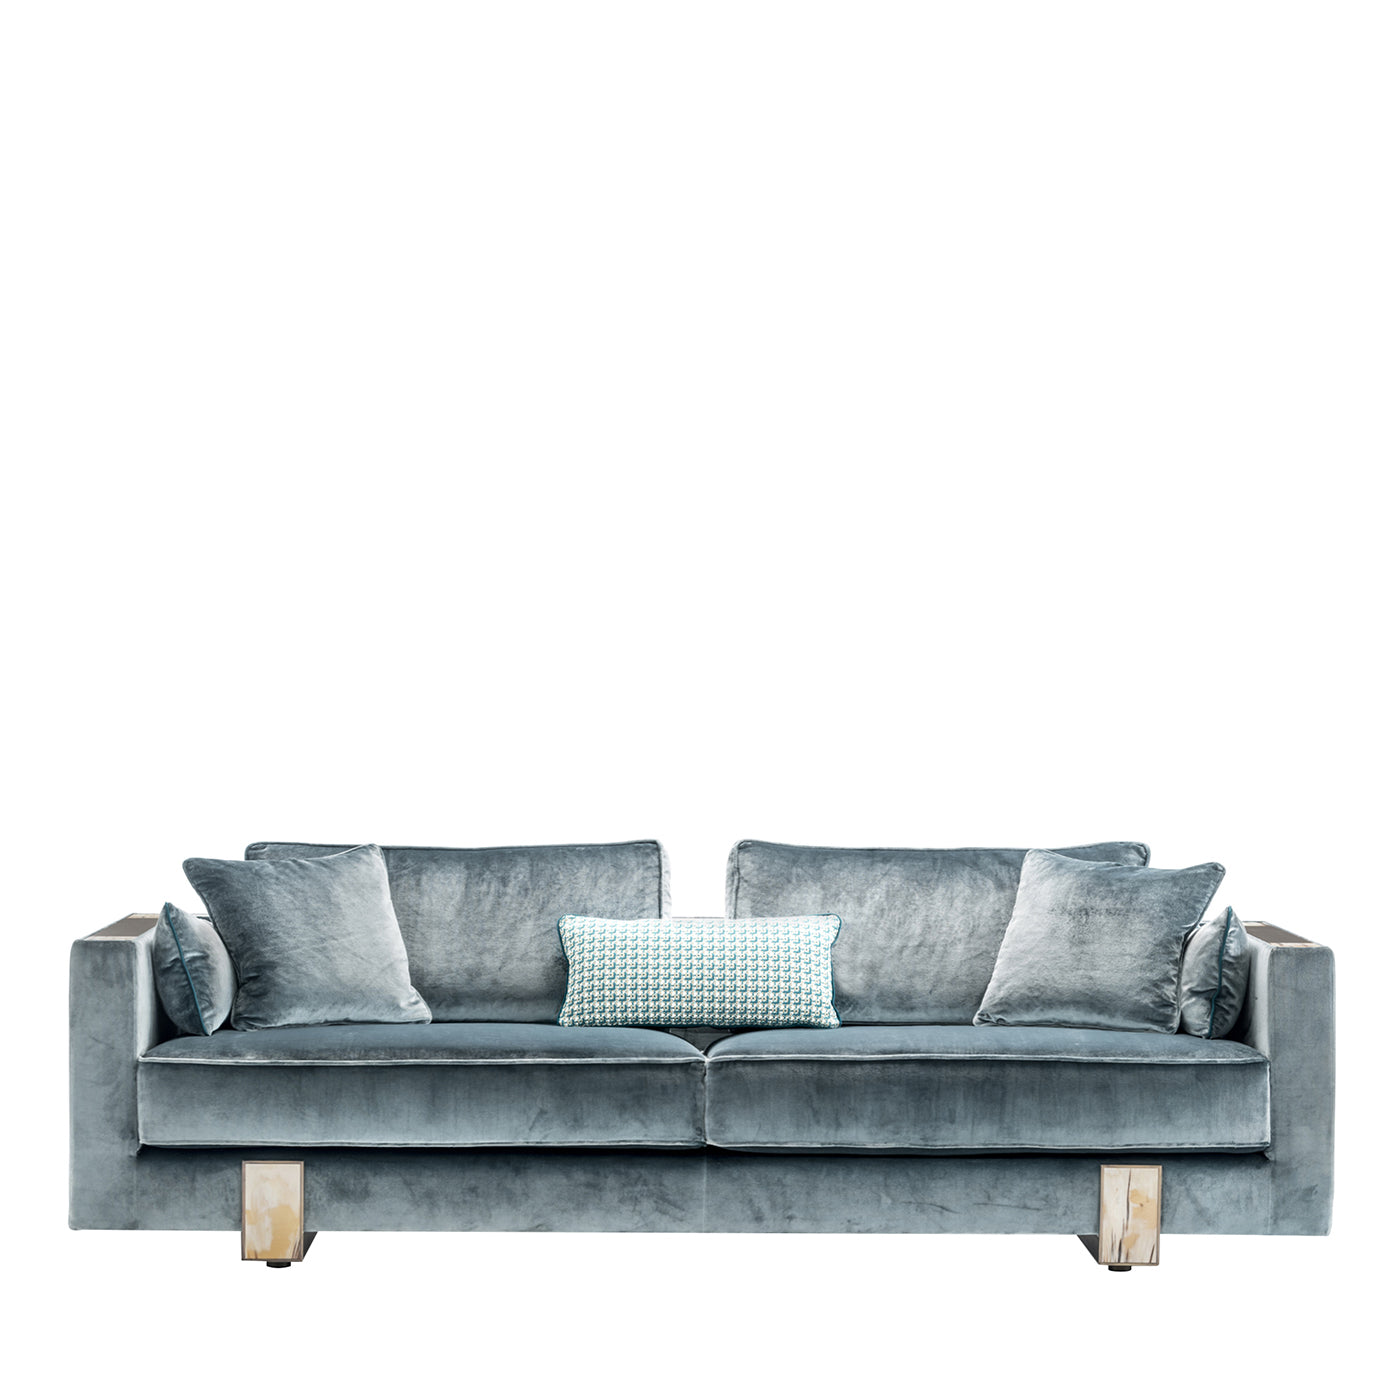 Adriano 3-Seater Blue Velvet Sofa with Horn Inlays - Main view